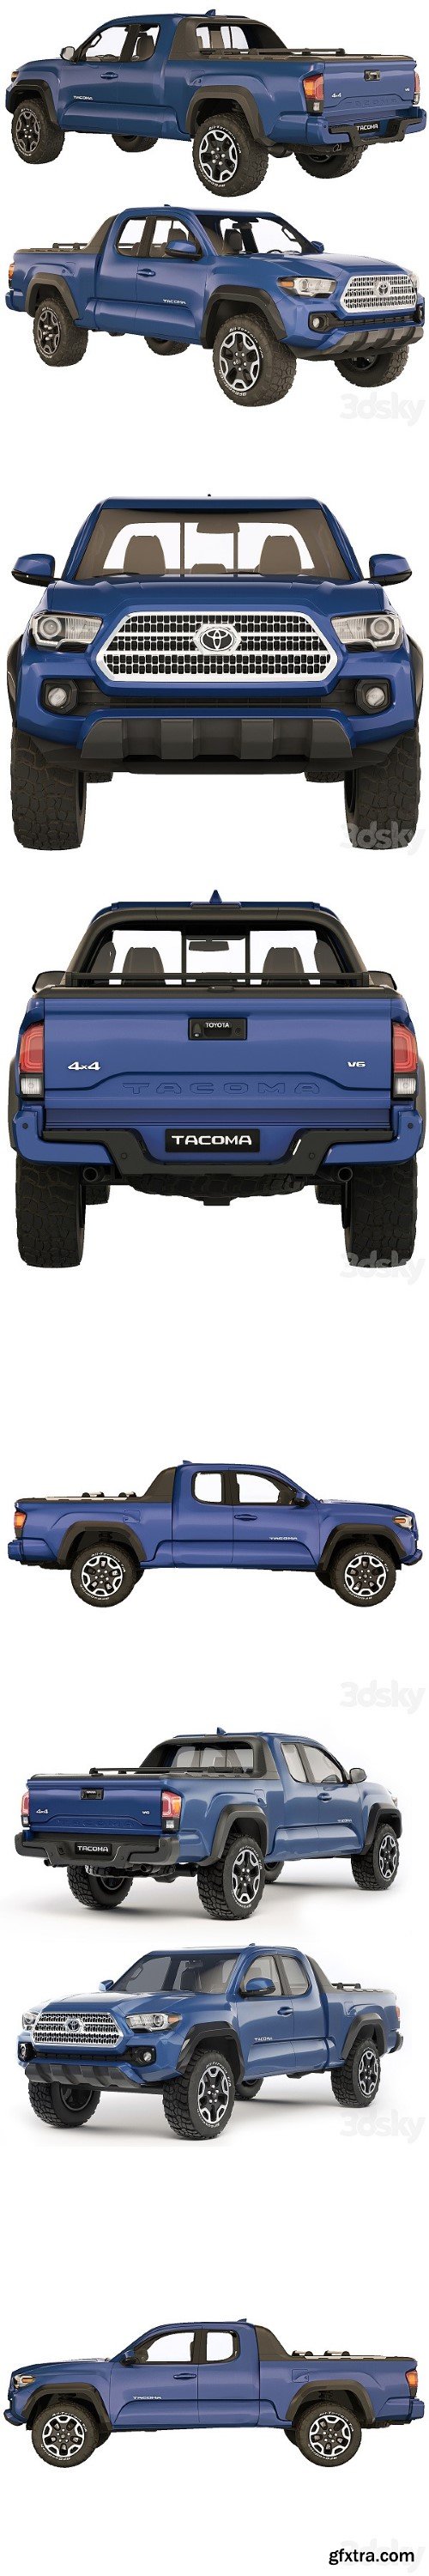 Toyota Tacoma Extended Cab 2017